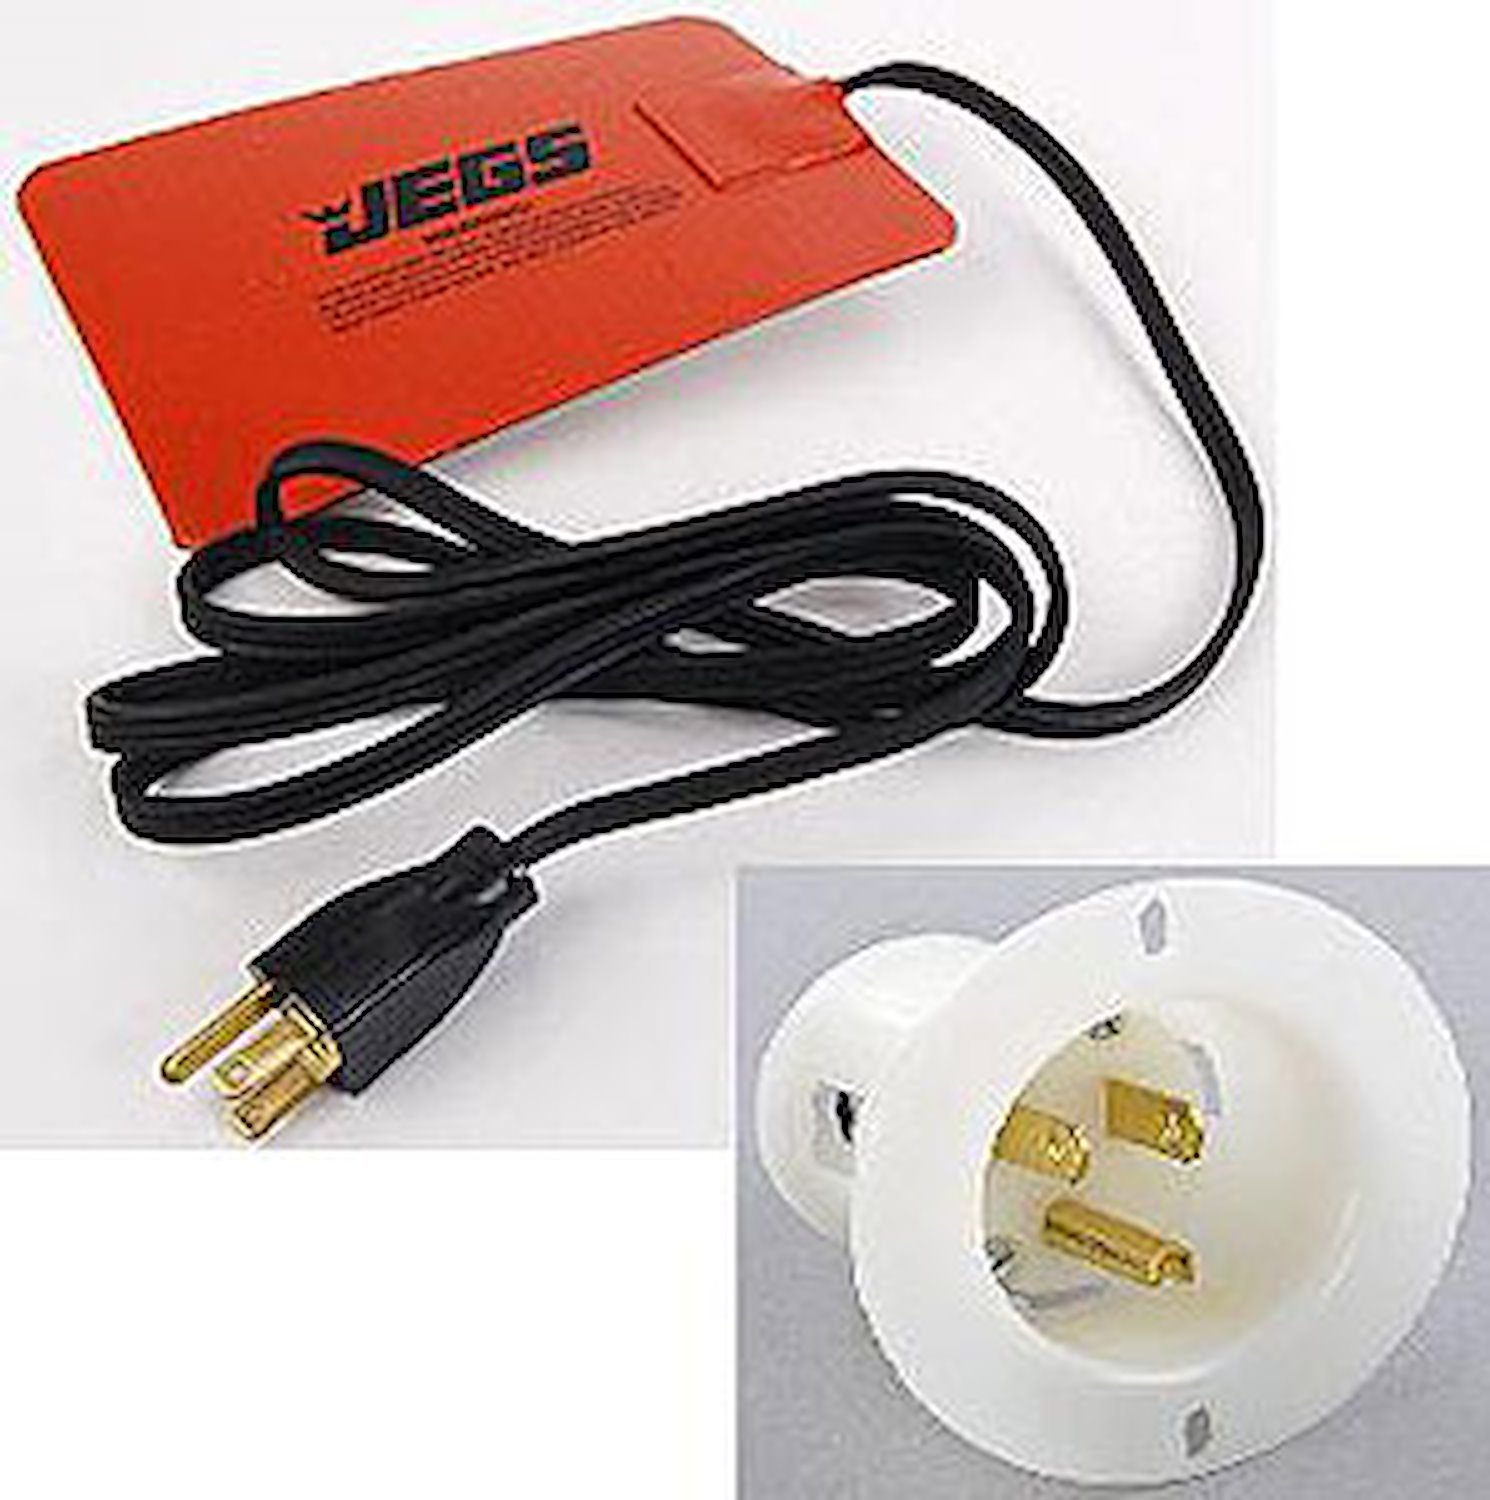 Oil System Heating Pad with 110V Recessed Outlet